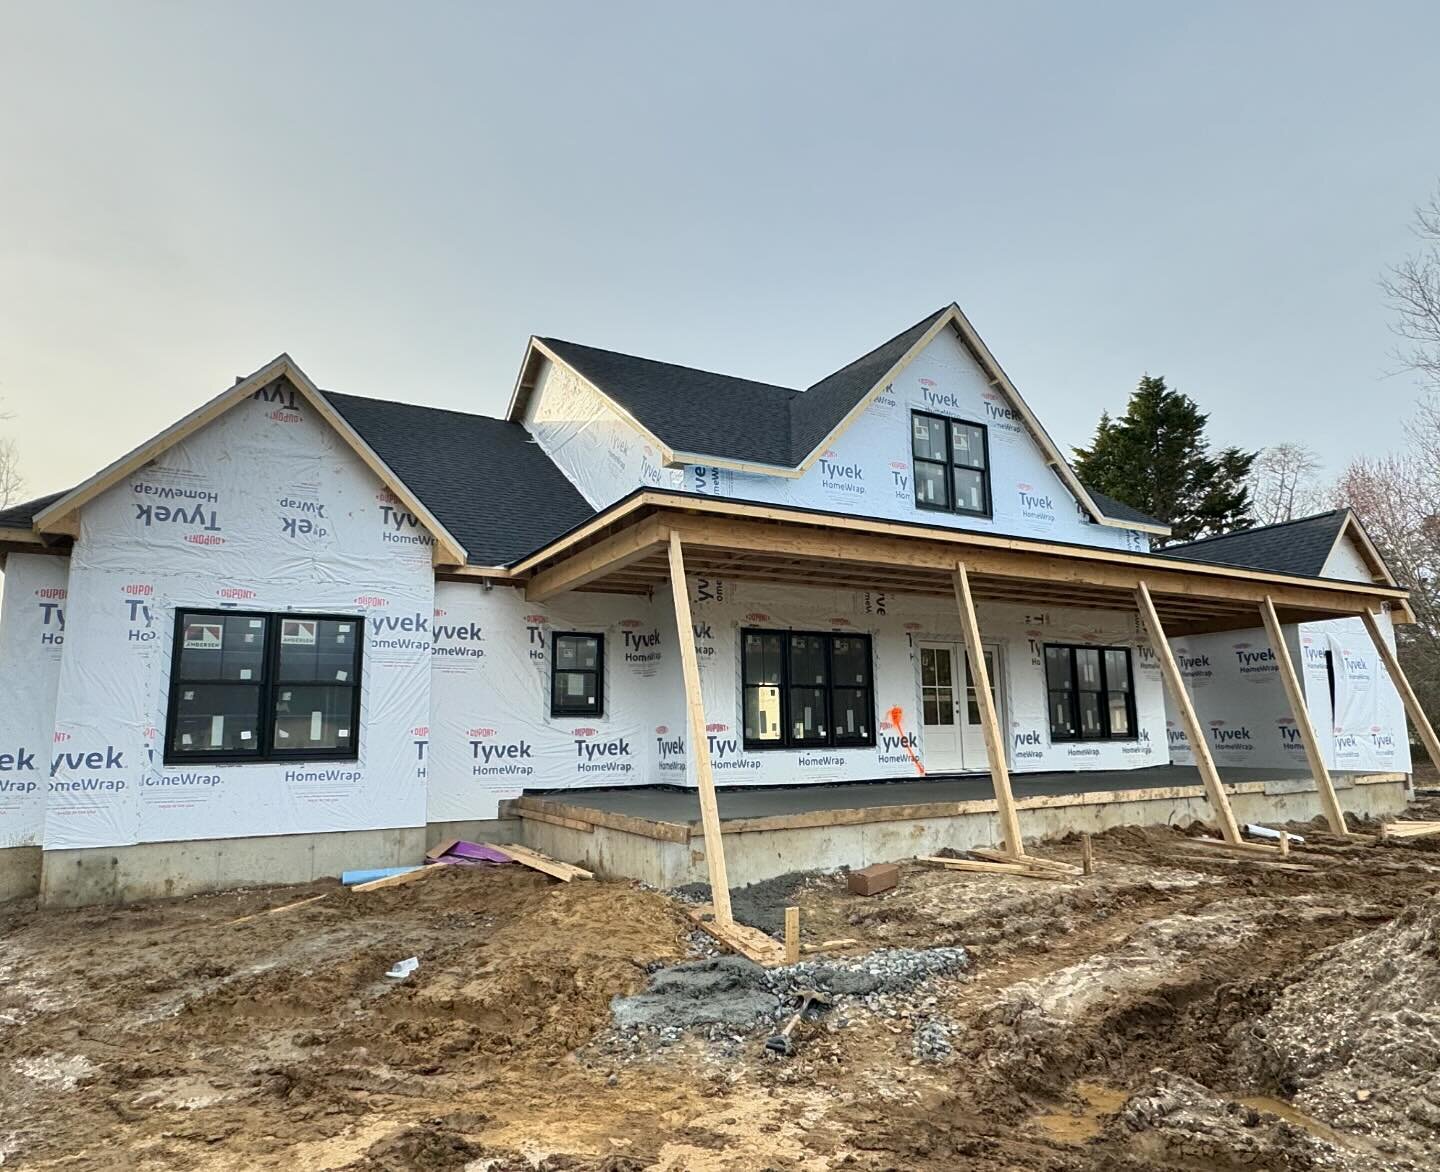 Headed into the weekend with some great progress on our beautiful Rehoboth Beach project! Excited to dive into a sunny week ahead and keep the momentum going. Stay tuned for updates and don&rsquo;t hesitate to DM us for your next project needs! ☀️ 🔨